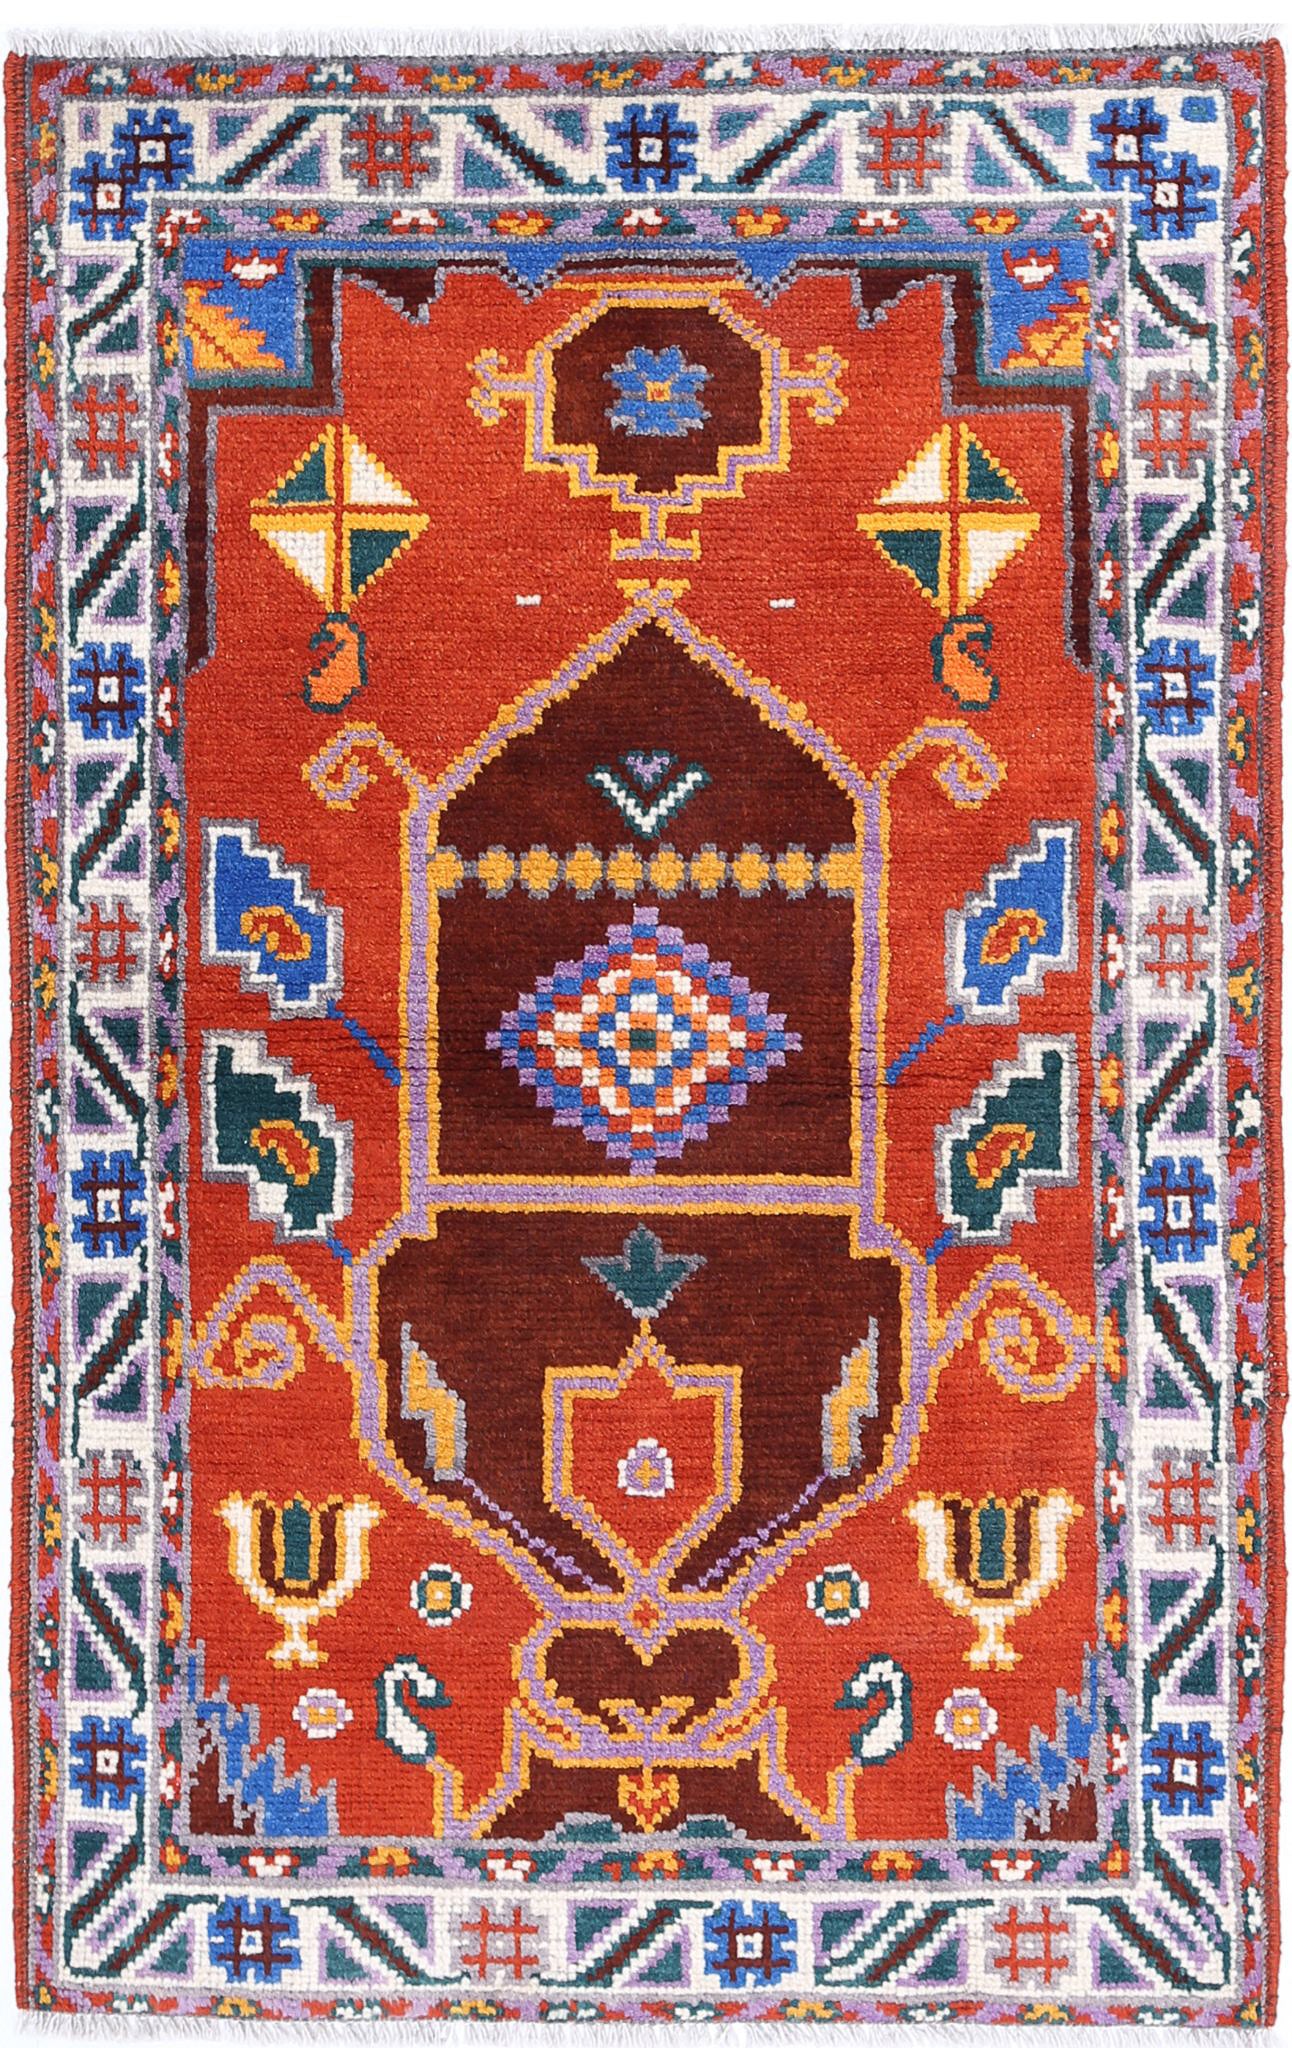 Revival-hand-knotted-qarghani-wool-rug-5014195.jpg